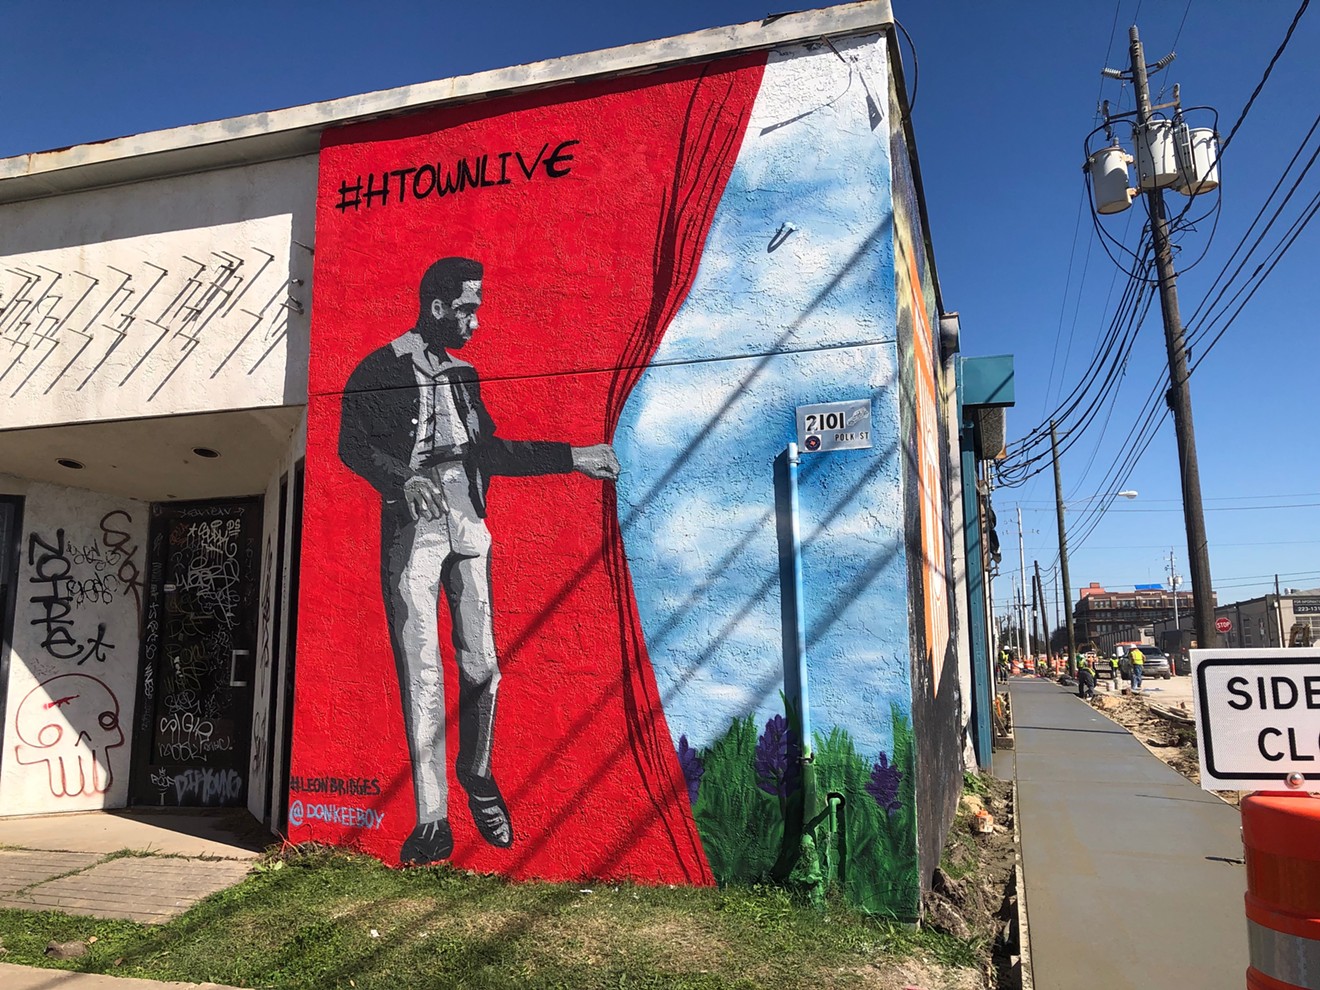 New mural of Leon Bridges by Donkeeboy sits across the street from 8th Wonder Brewery in Eado.